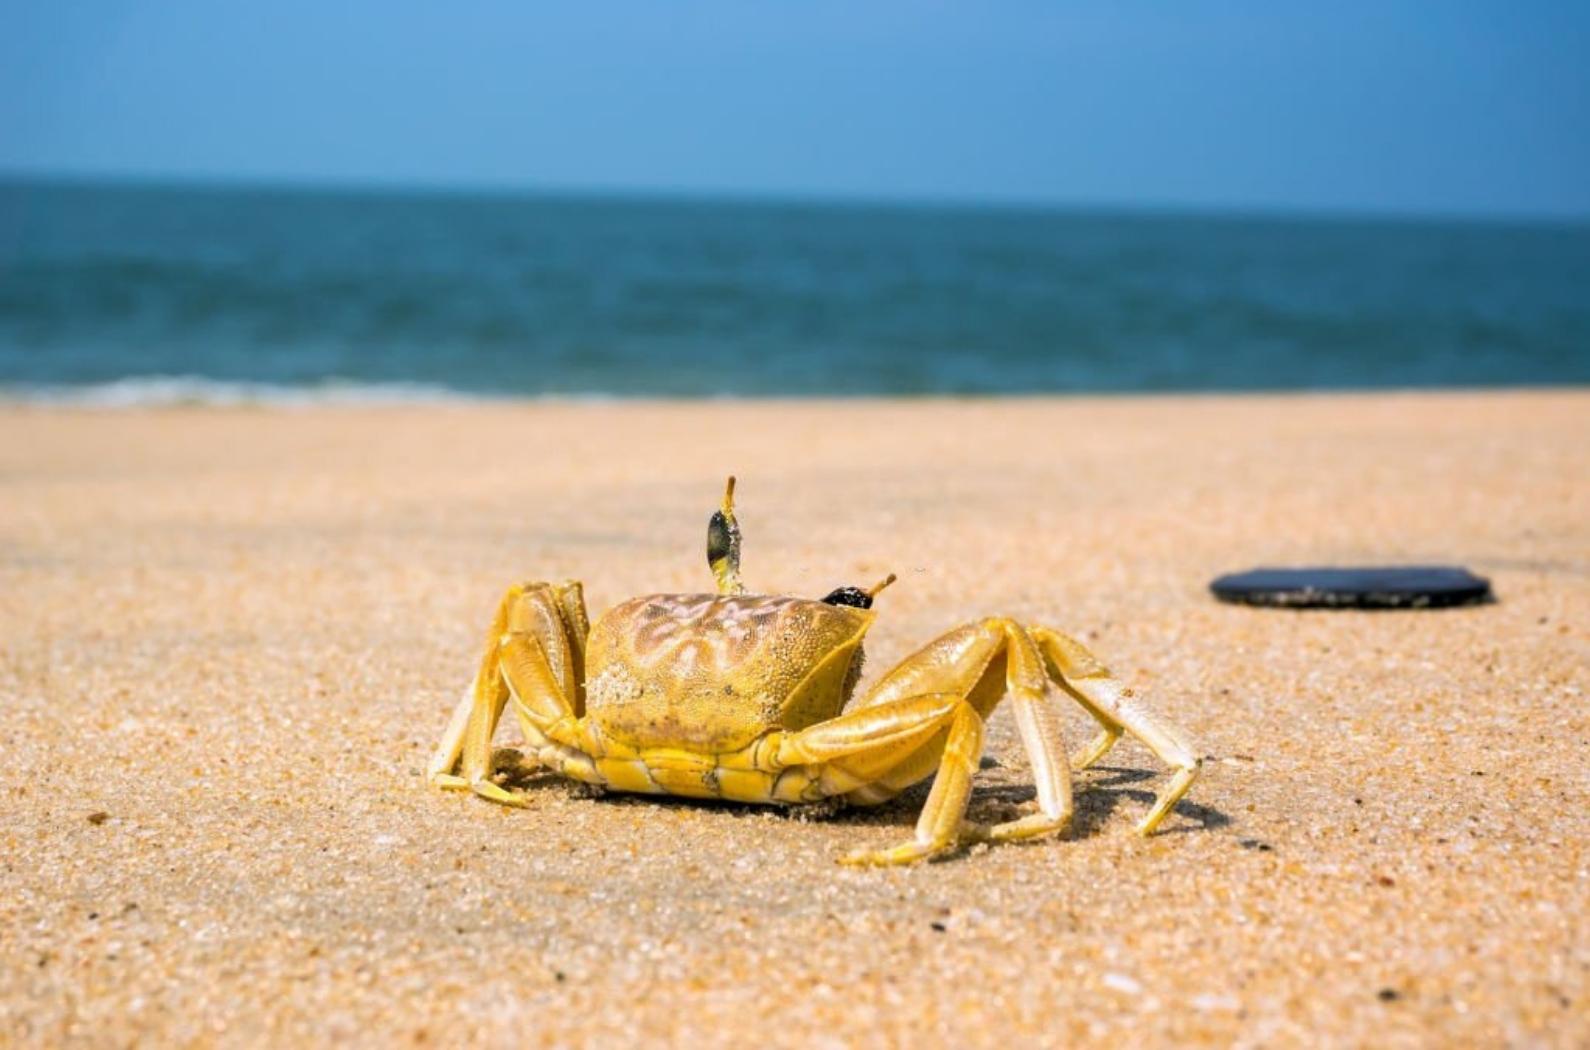 Crab on the white sand beach with blue aqua sea background in summer.